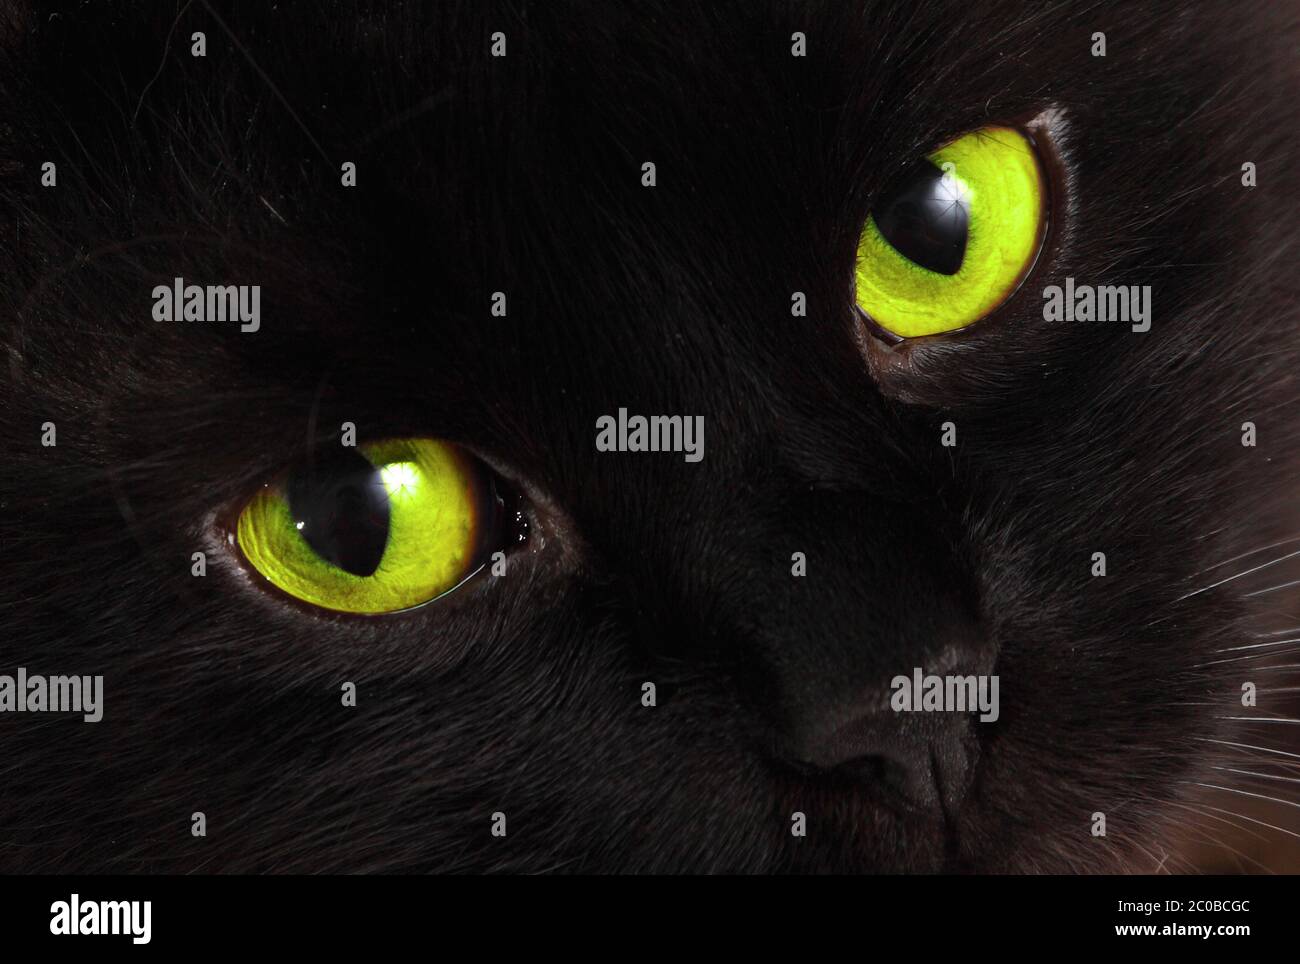 Black cat looks at you with bright green eyes Stock Photo